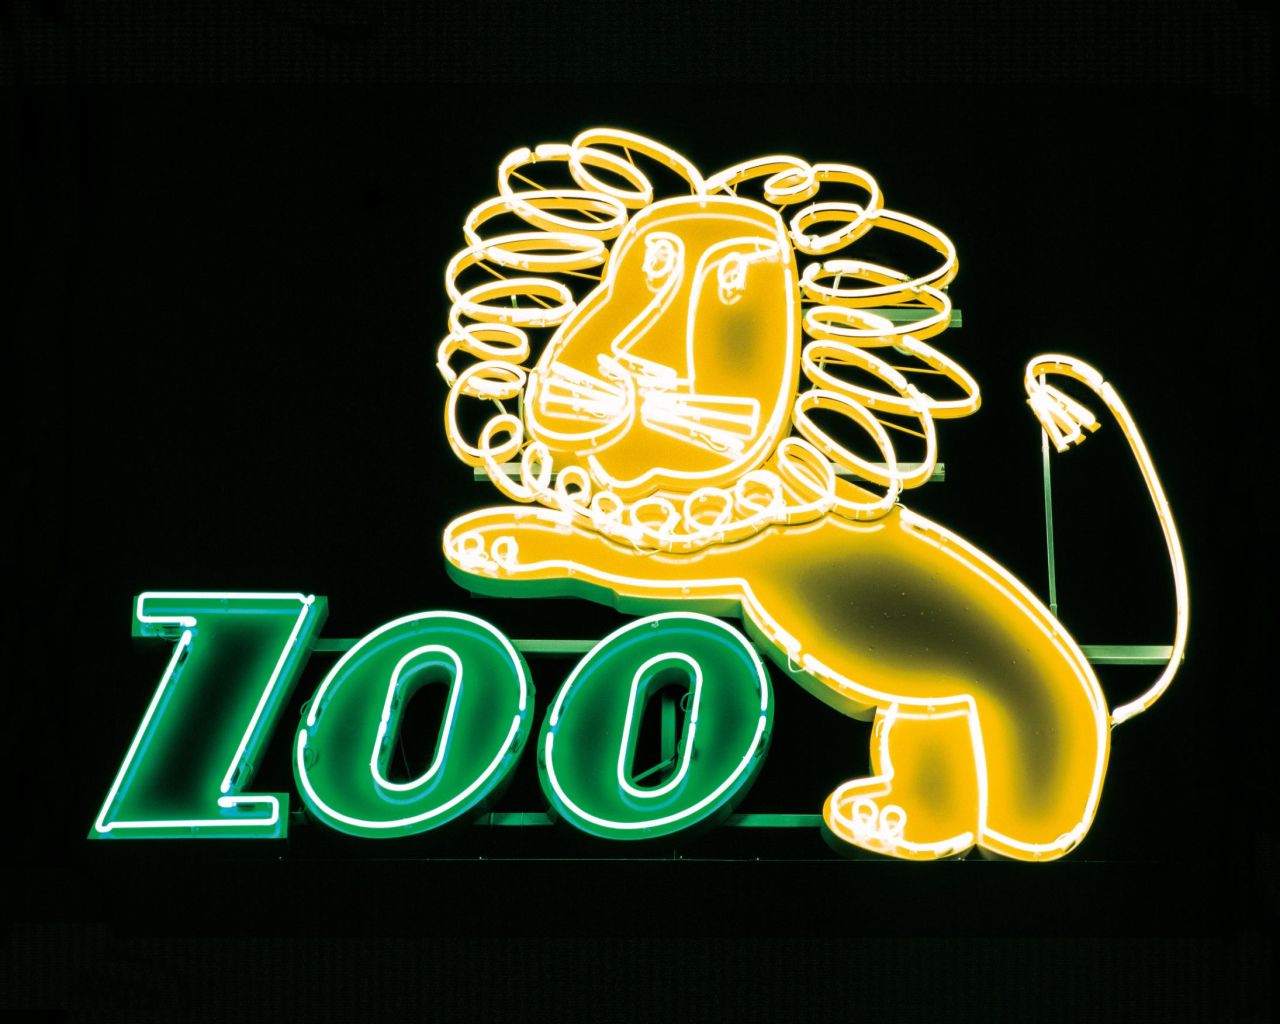 Many of the neon signs, found in major cities throughout Poland, were known for their unconstrained designs. 